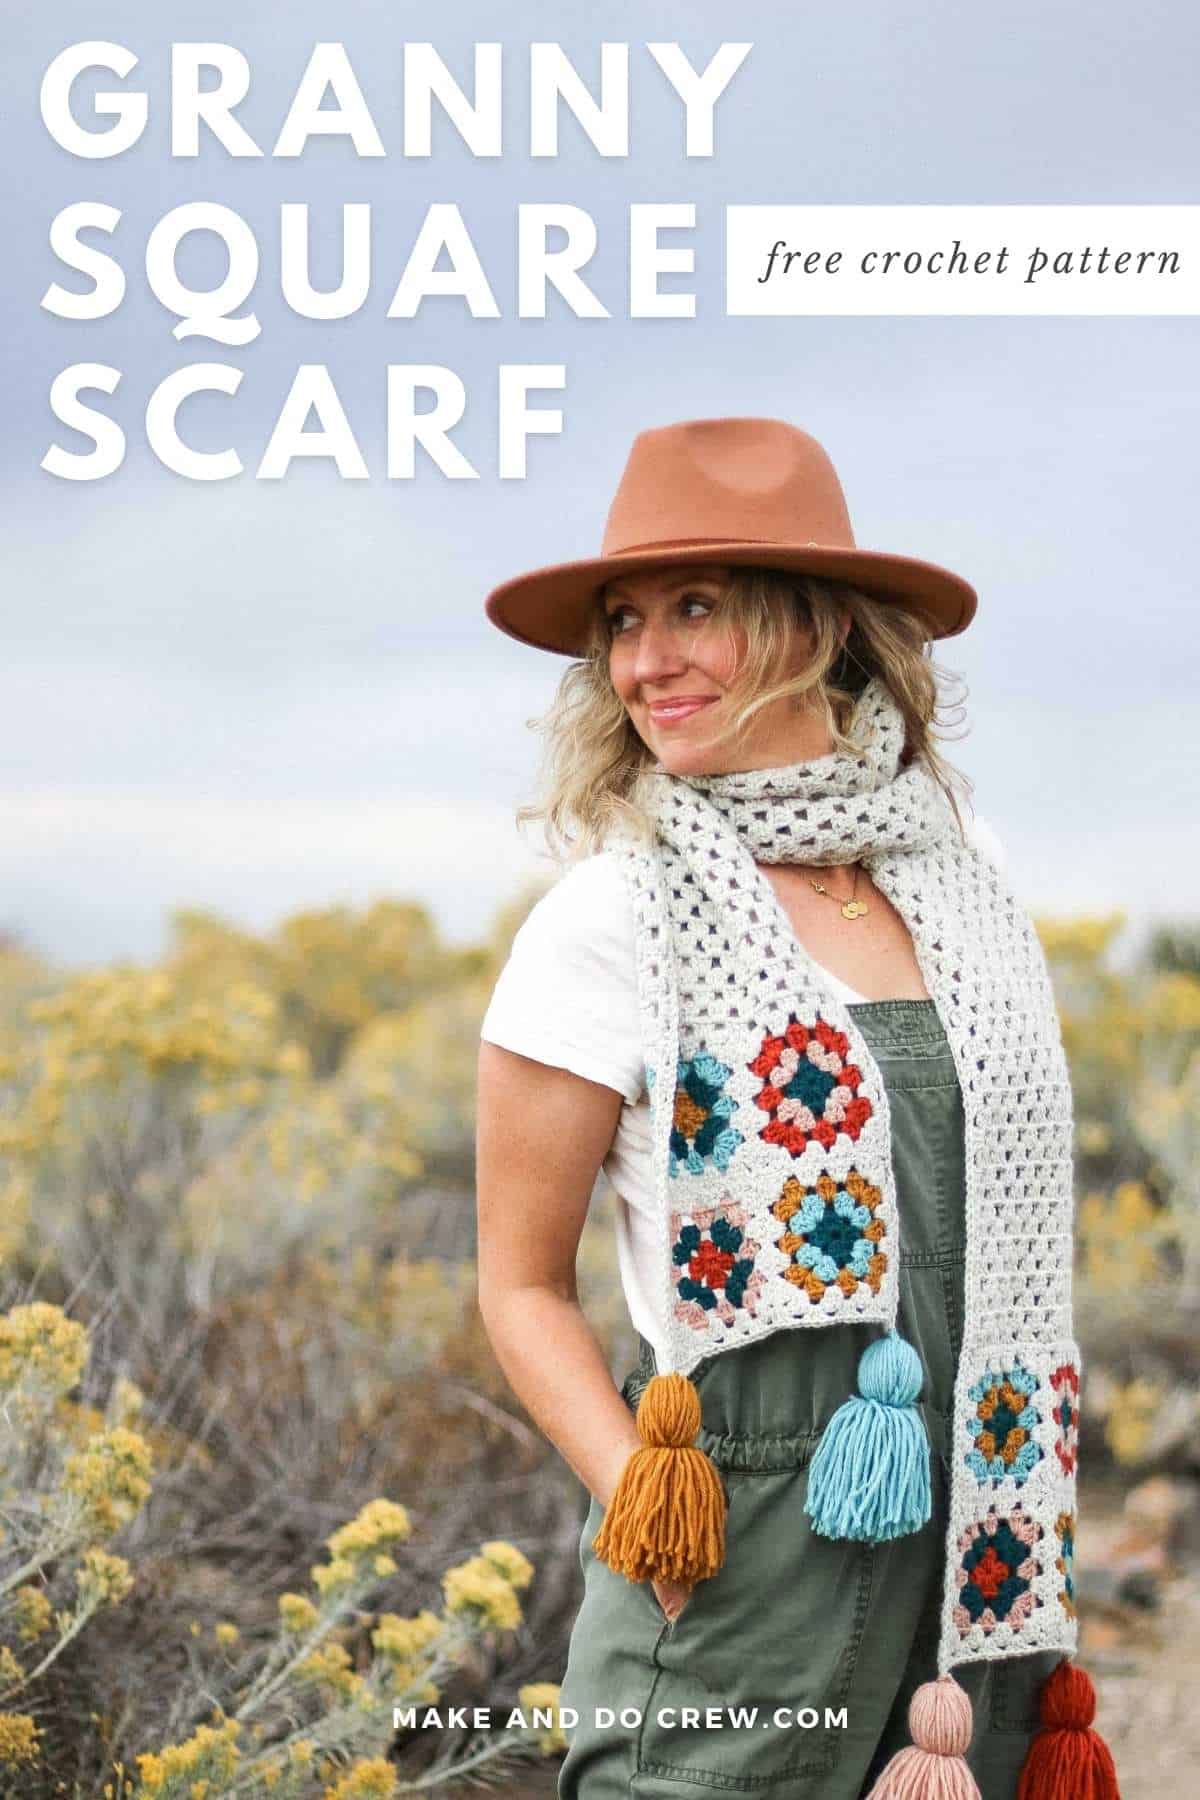 A woman wearing a crochet granny square scarf.